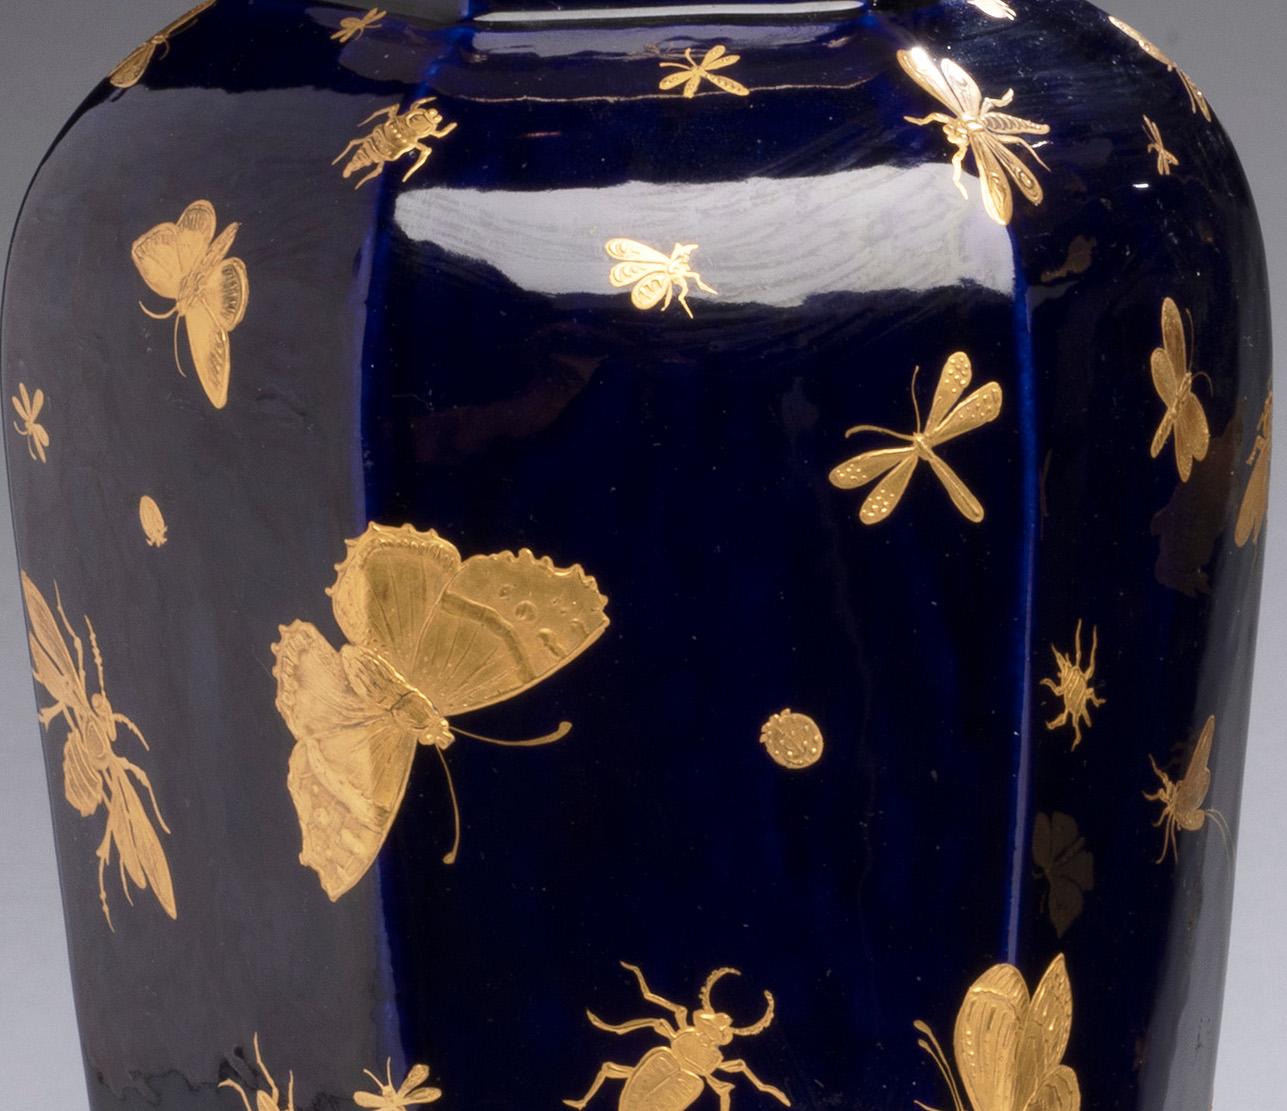 Pair of English Porcelain Vases with Insects from John Mortlock circa 1875 For Sale 2